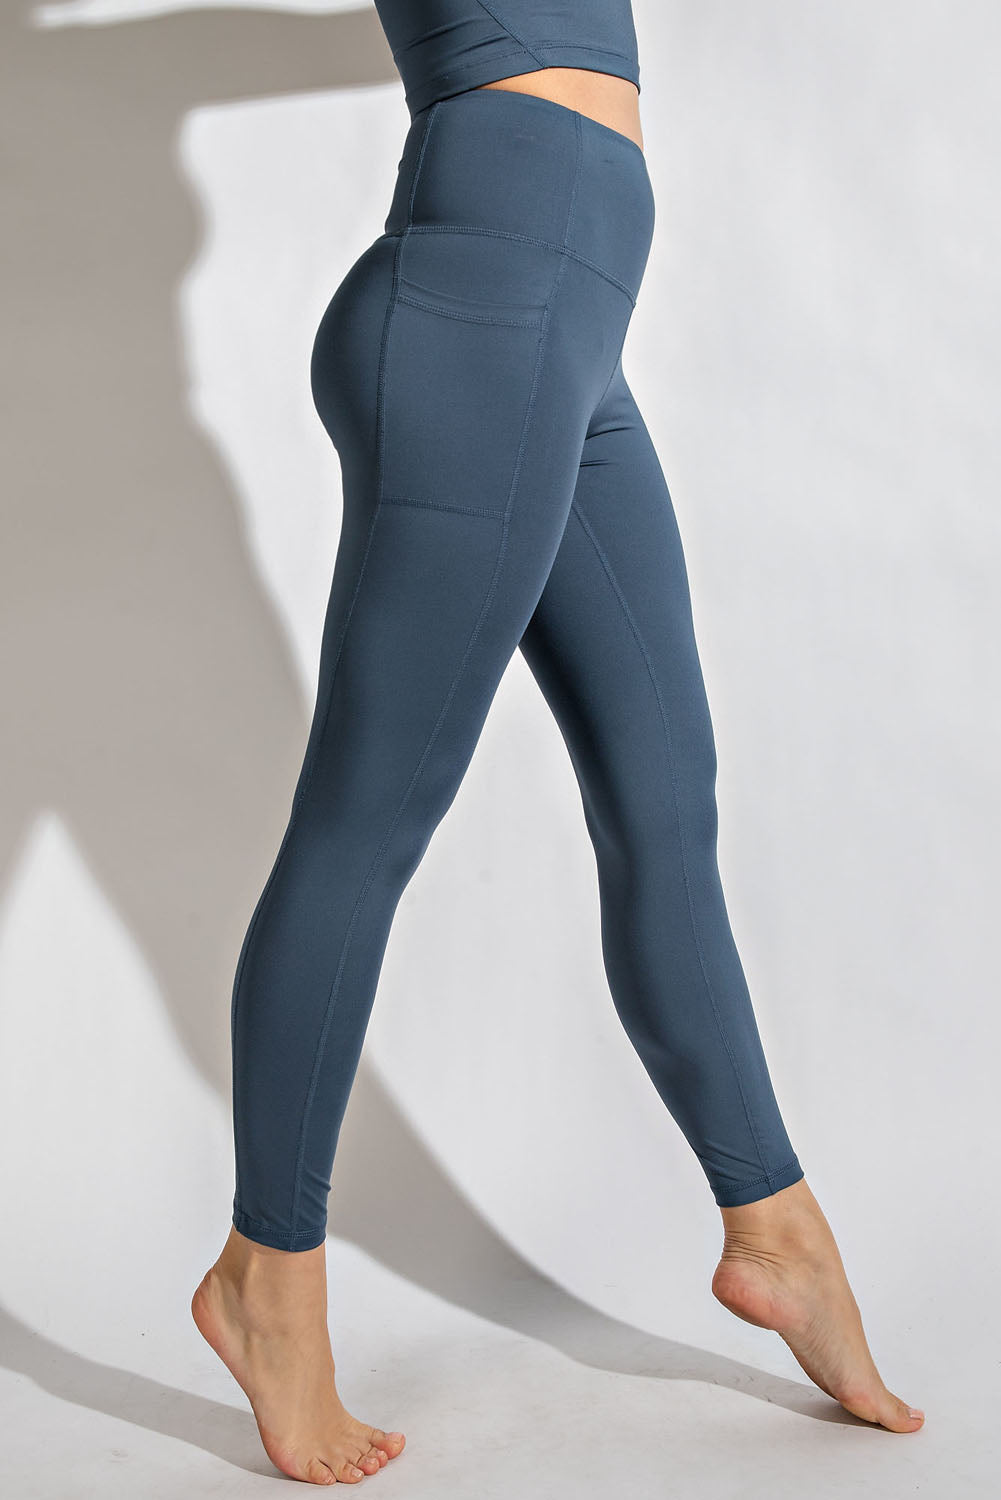 Rae Mode Full Length Compression Leggings With Pockets- Iron Blue Activewear Perfect Pair Warrensburg Illinois